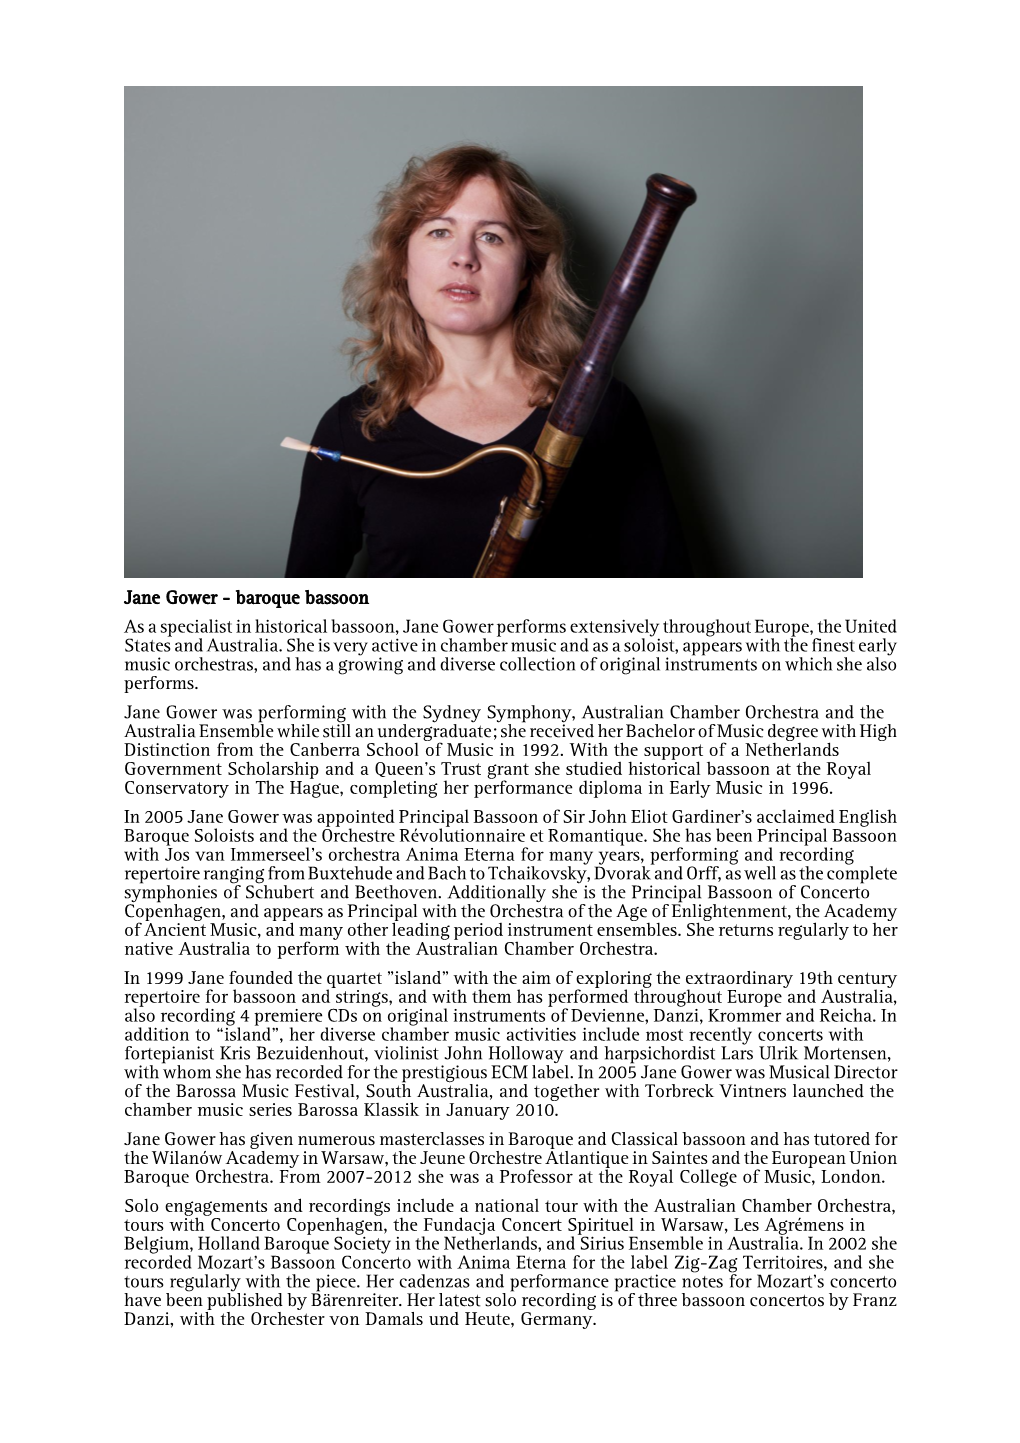 Jane Gower - Baroque Bassoon As a Specialist in Historical Bassoon, Jane Gower Performs Extensively Throughout Europe, the United States and Australia